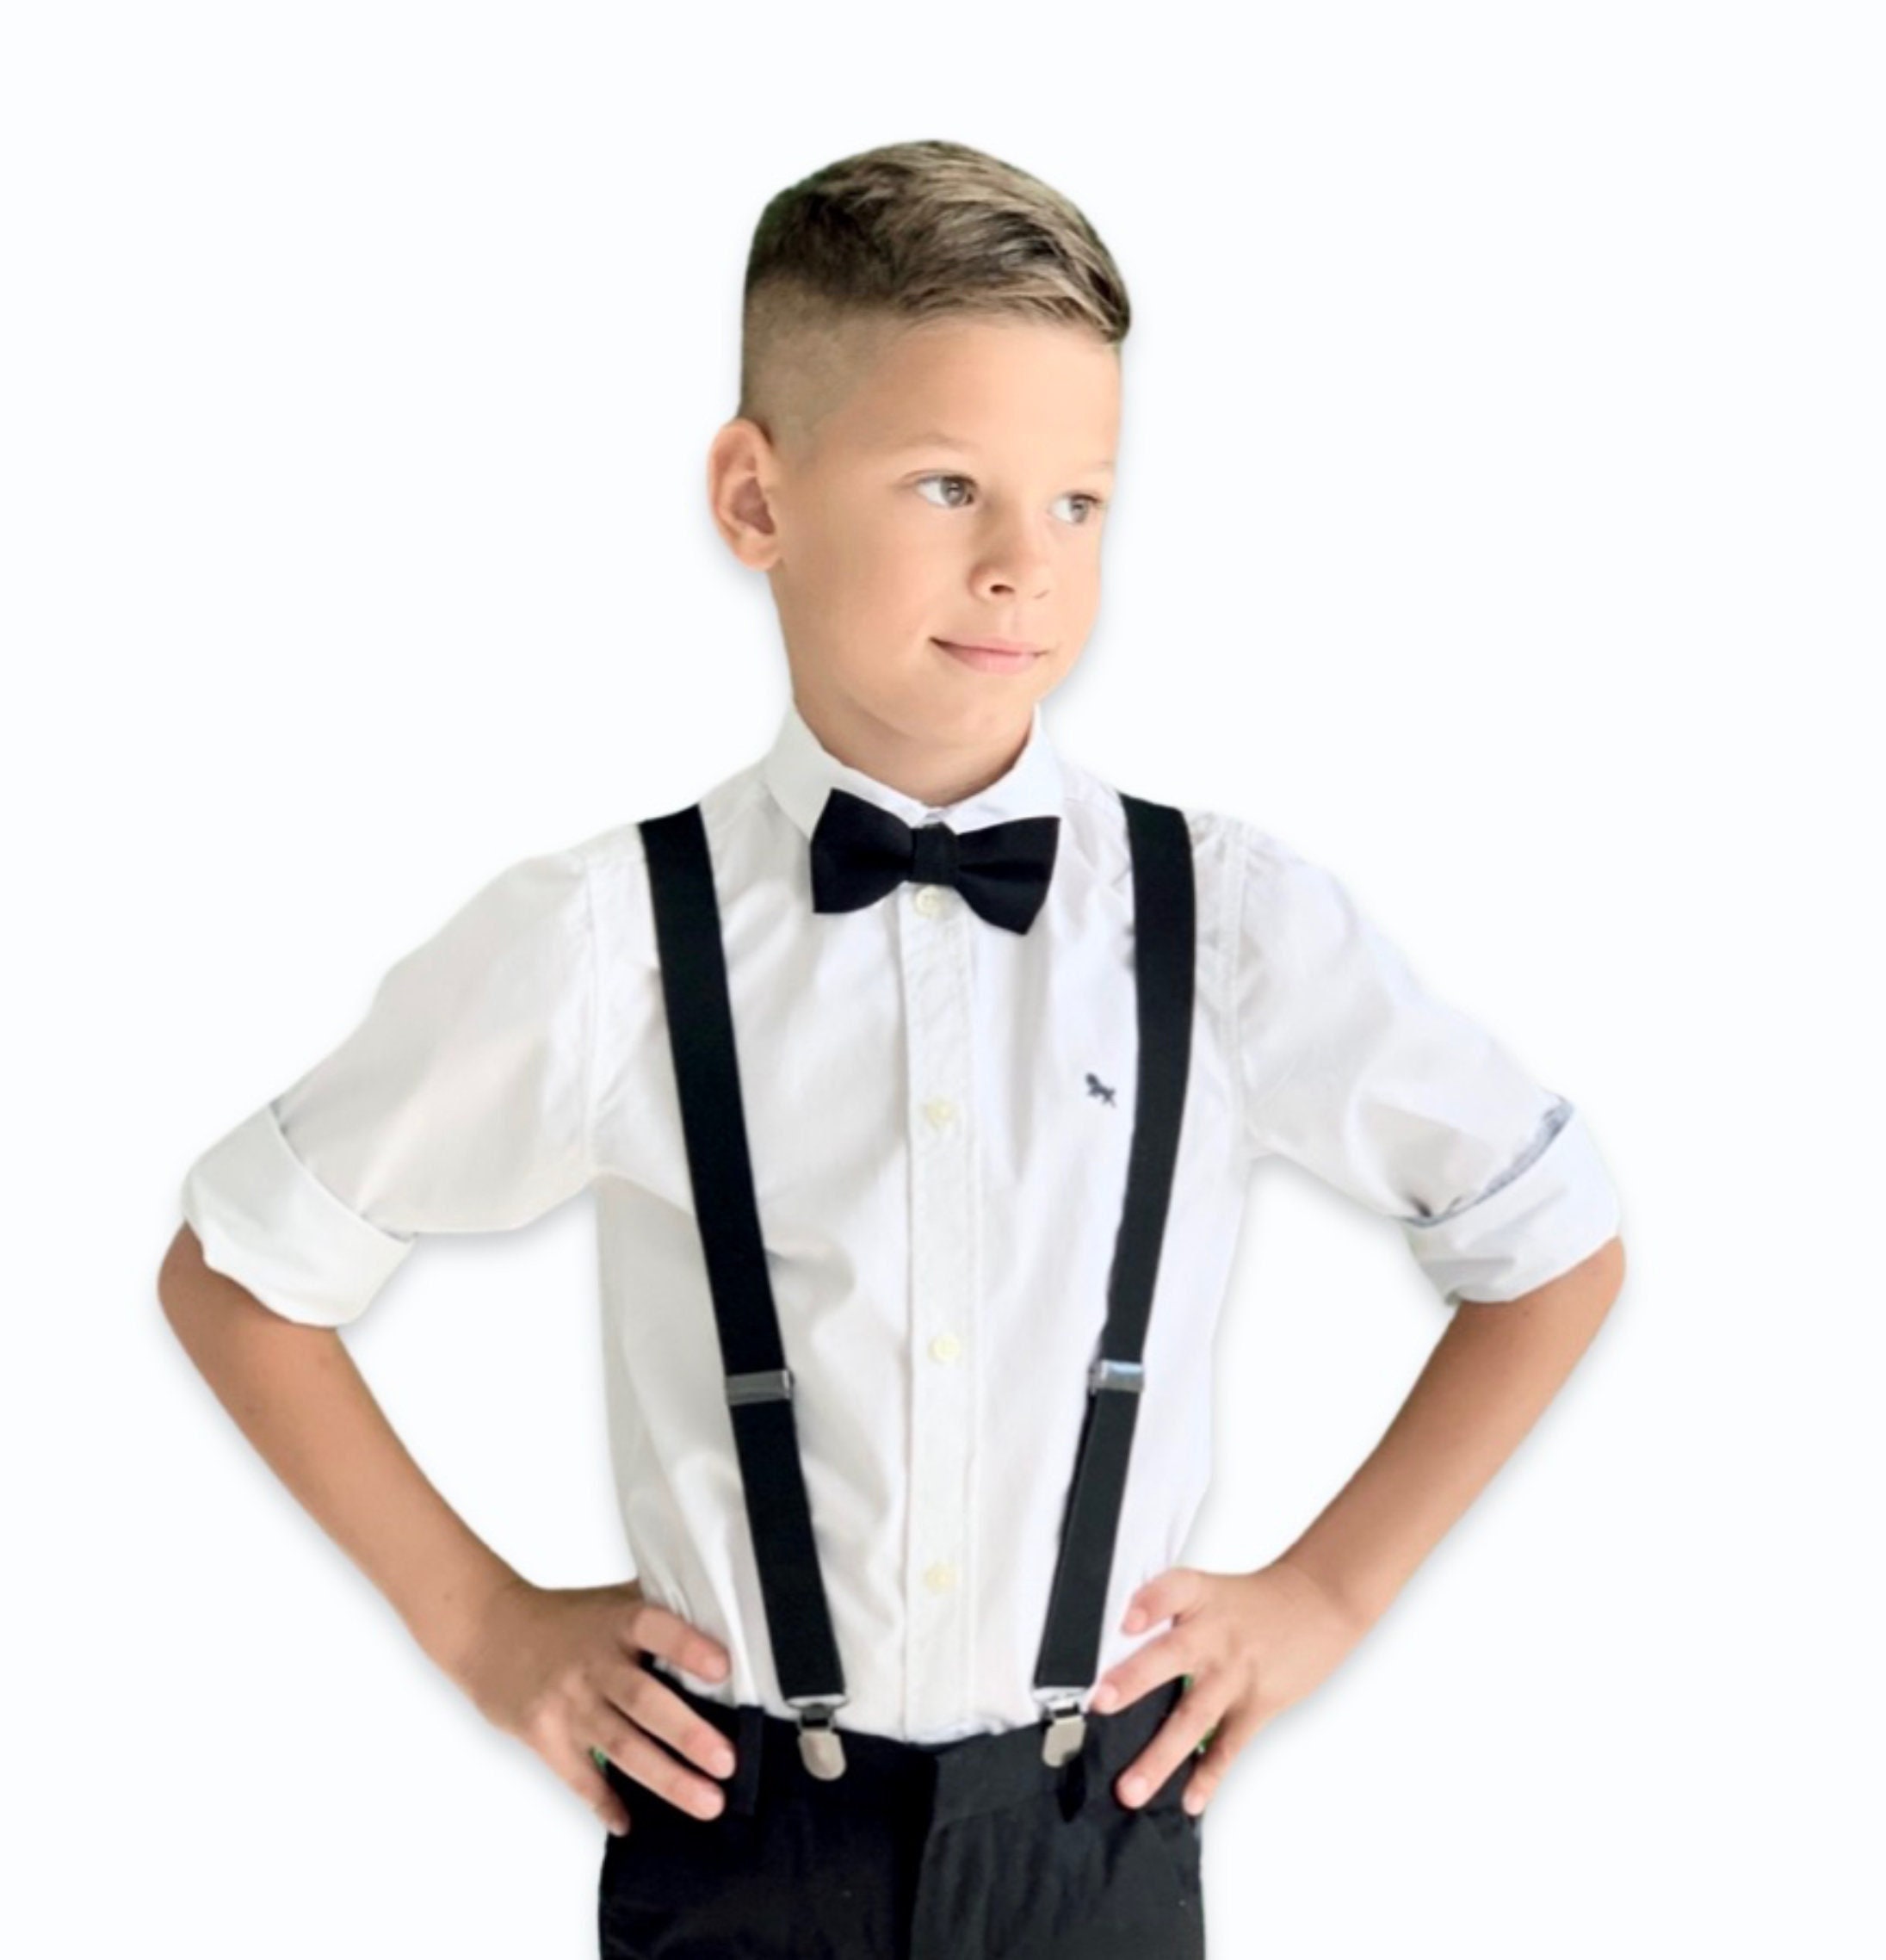 Cake Smash Outfit Boys Suspender Bow Tie Set with Birthday Hat Formal Tuxedo Suit for Kids Baby Photo Shoot Costume 2-6 